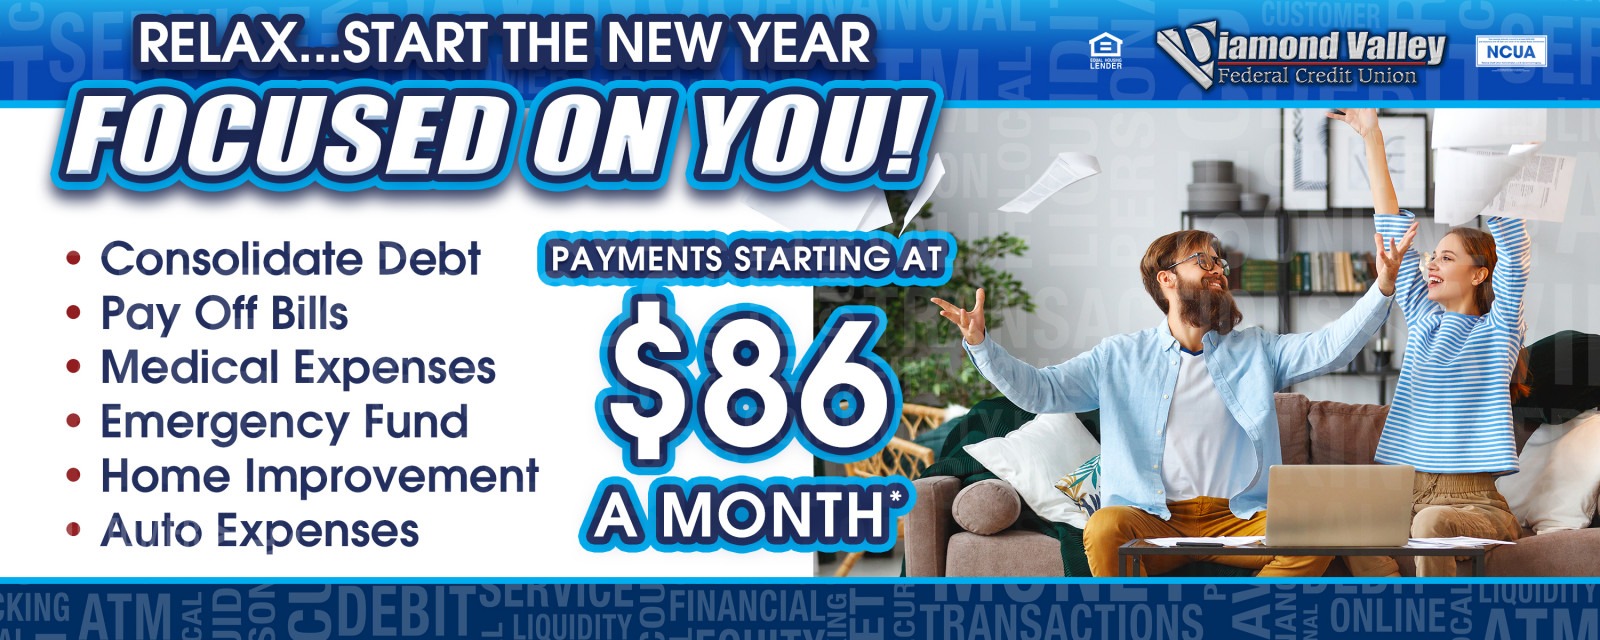 Payments on Personal Loans start as low as $86 per month!